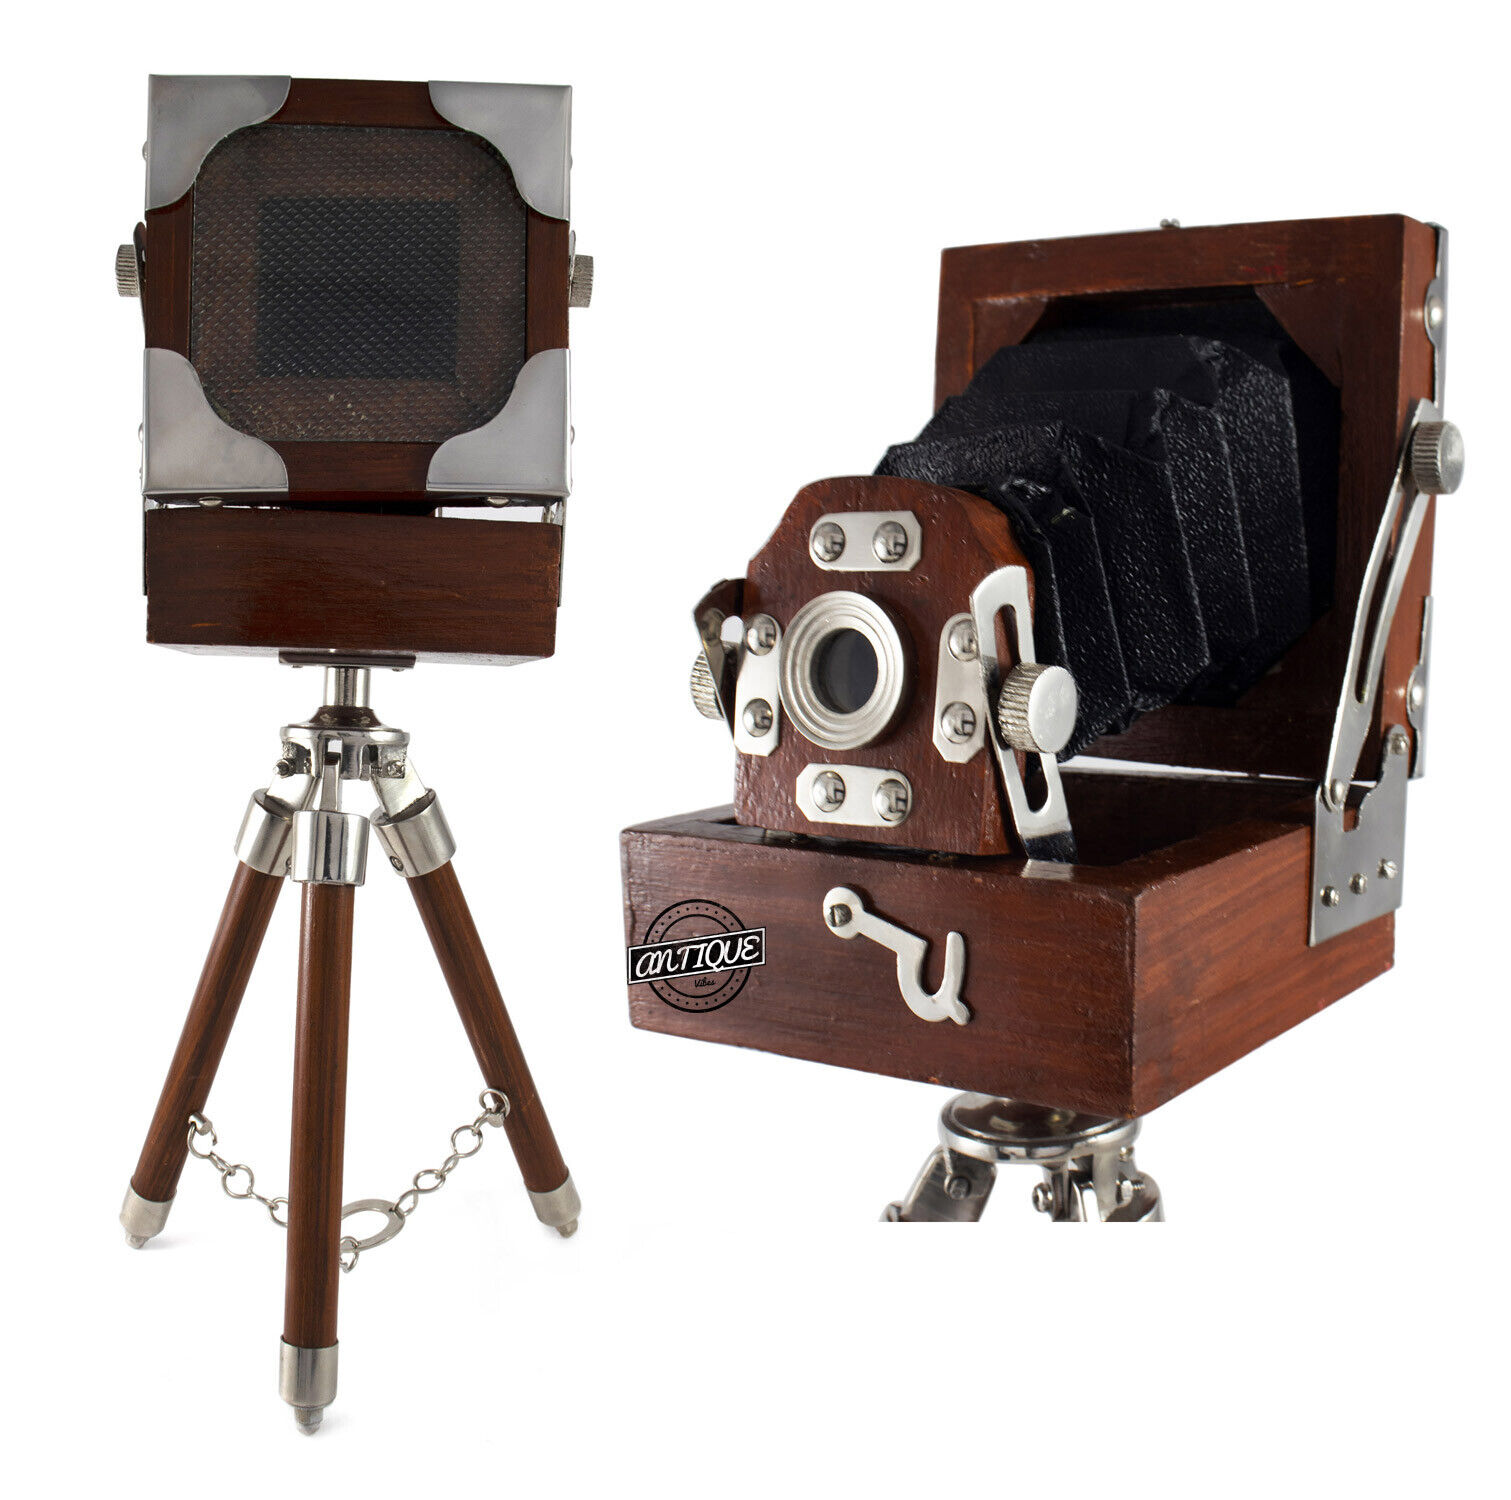 Vintage Old Film Camera with Wooden Tripod Stand Antique Style Tabletop Décor Ne